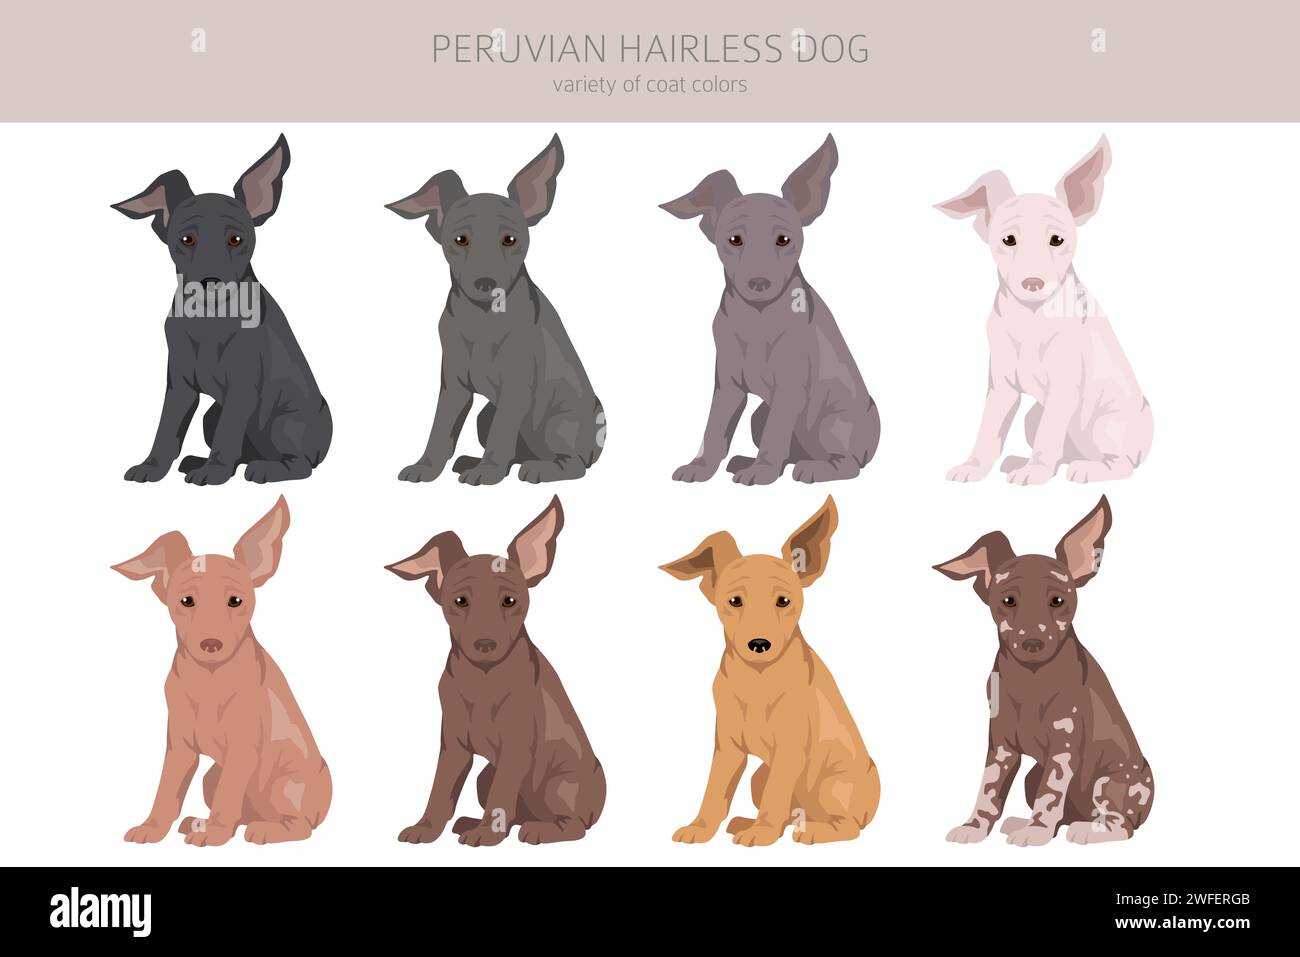 Peruvian hairless dog puppy clipart. Different poses, coat colors set.  Vector illustration Stock Vector